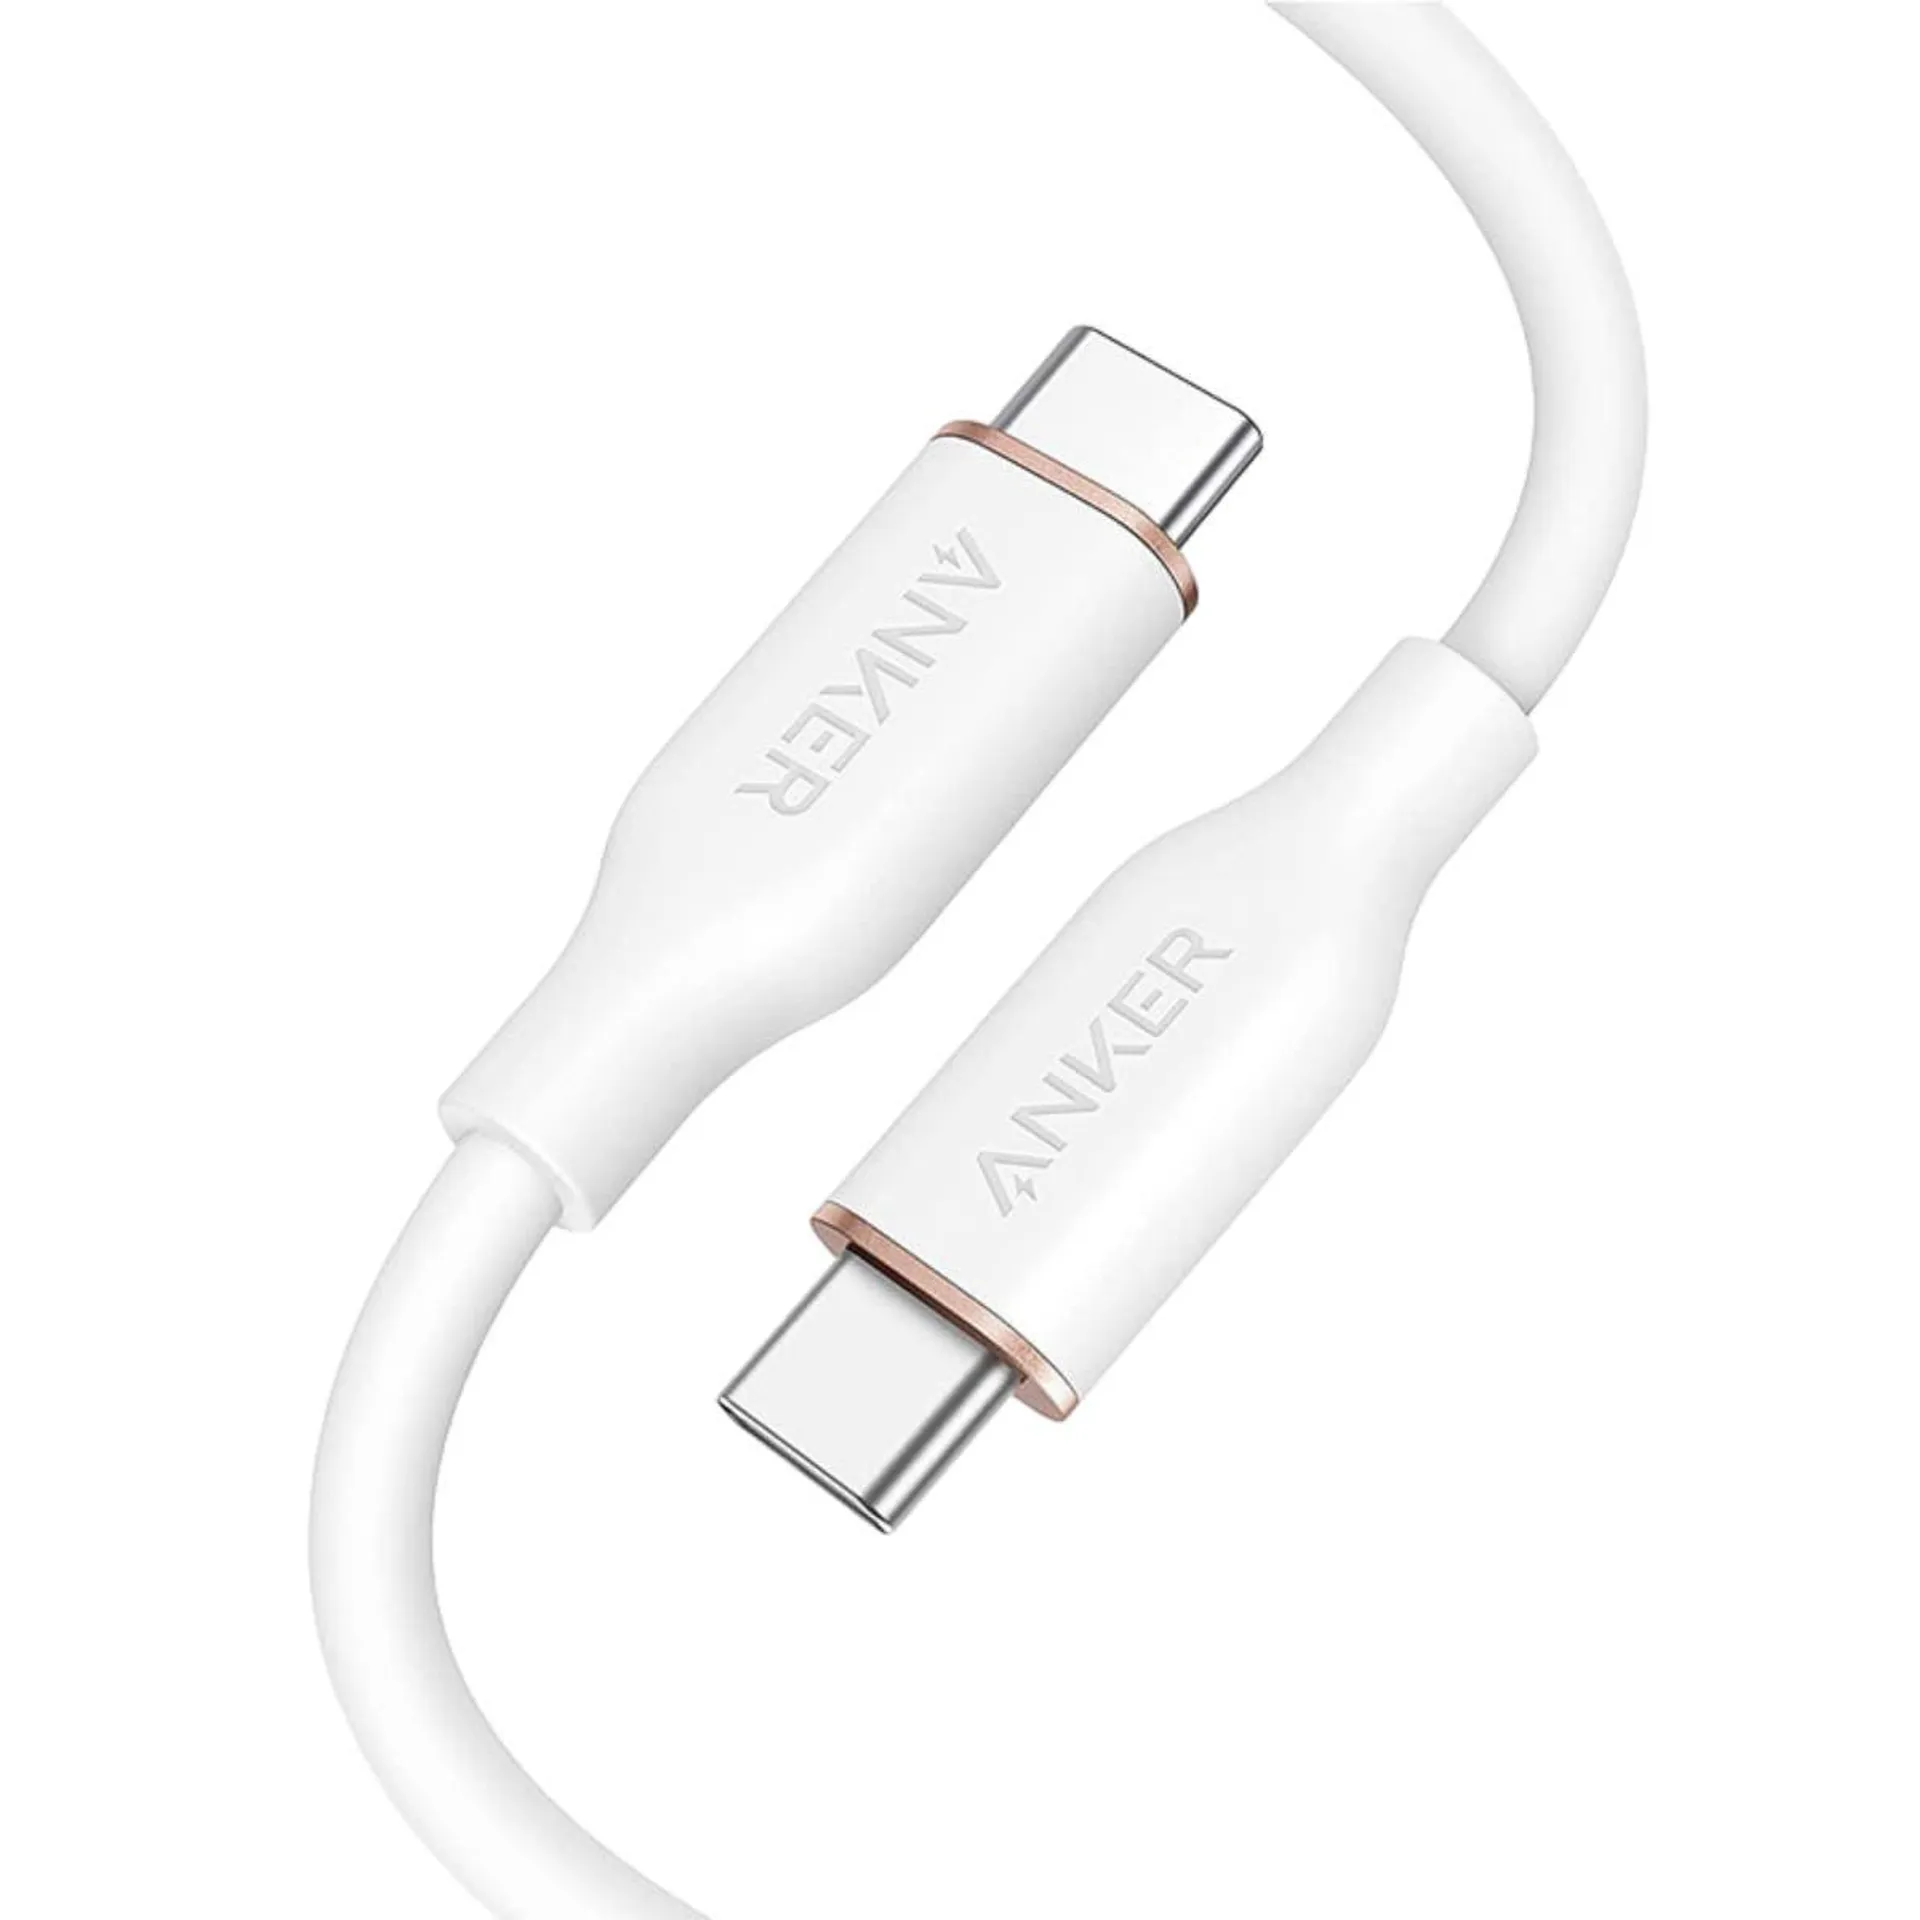 Anker PowerLine III Flow USB-C to USB-C 1.8m Cable - White